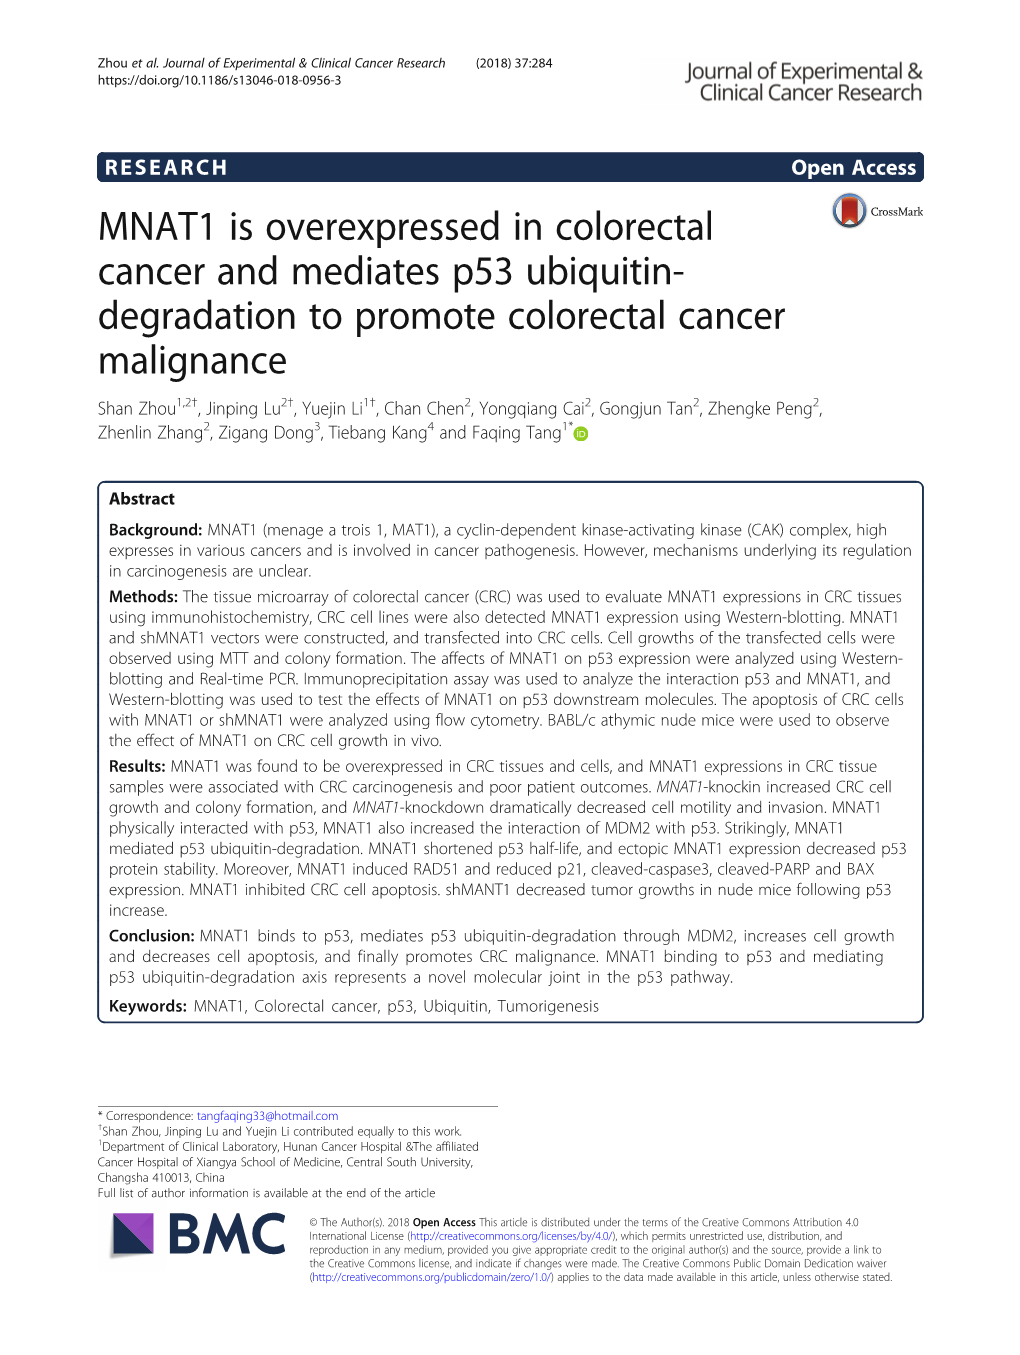 MNAT1 Is Overexpressed in Colorectal Cancer and Mediates P53 Ubiquitin-Degradation to Promote Colorectal Cancer Malignance